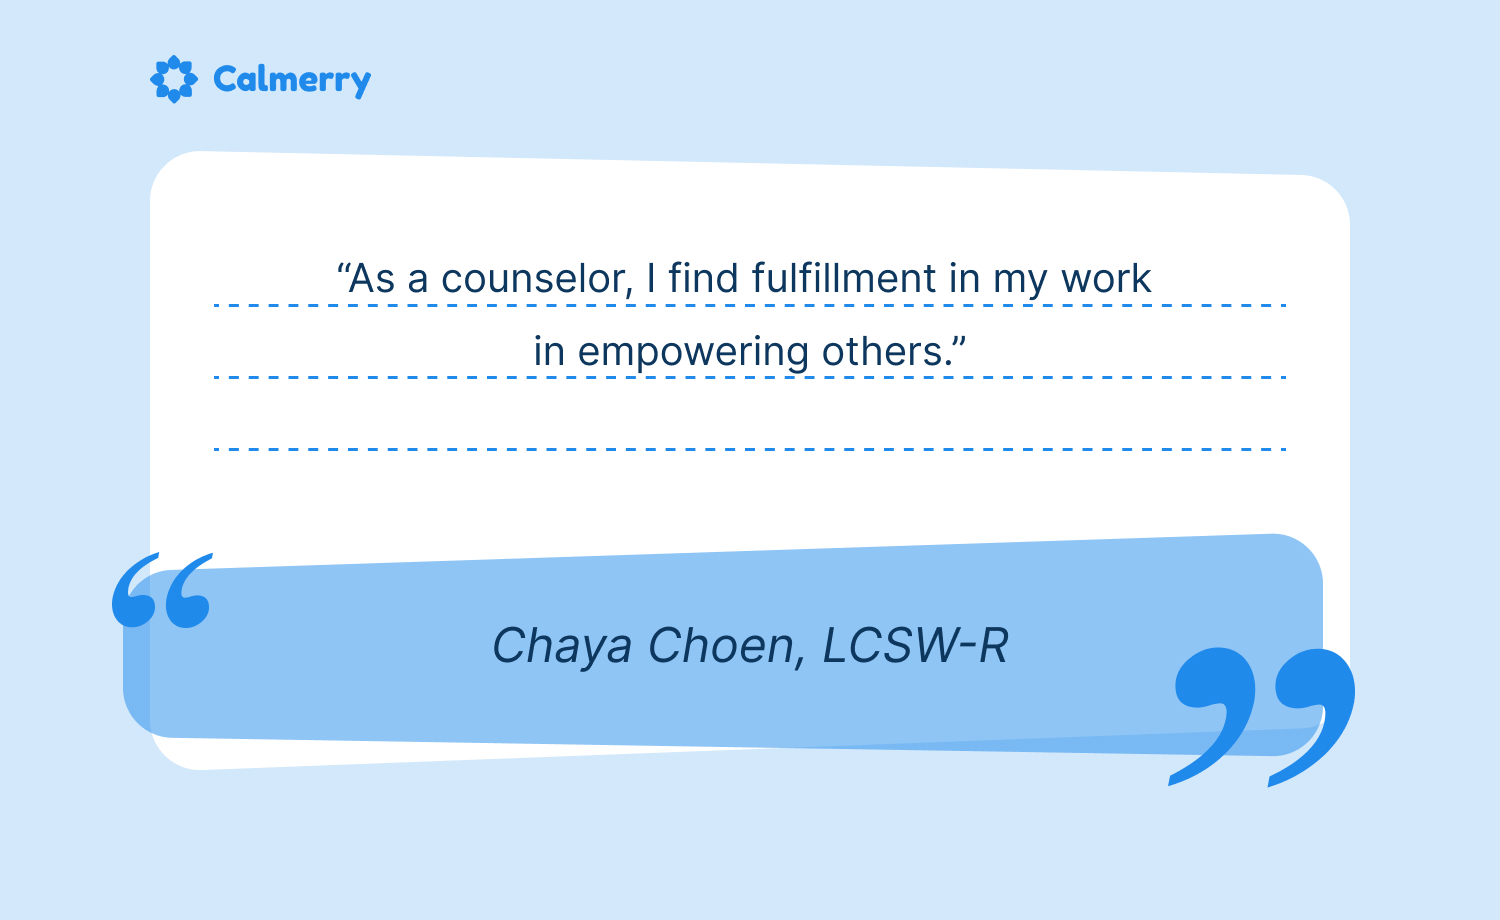 The Calmerry counselor quote: "As a counselor, I find fulfillment in my work in empowering others."